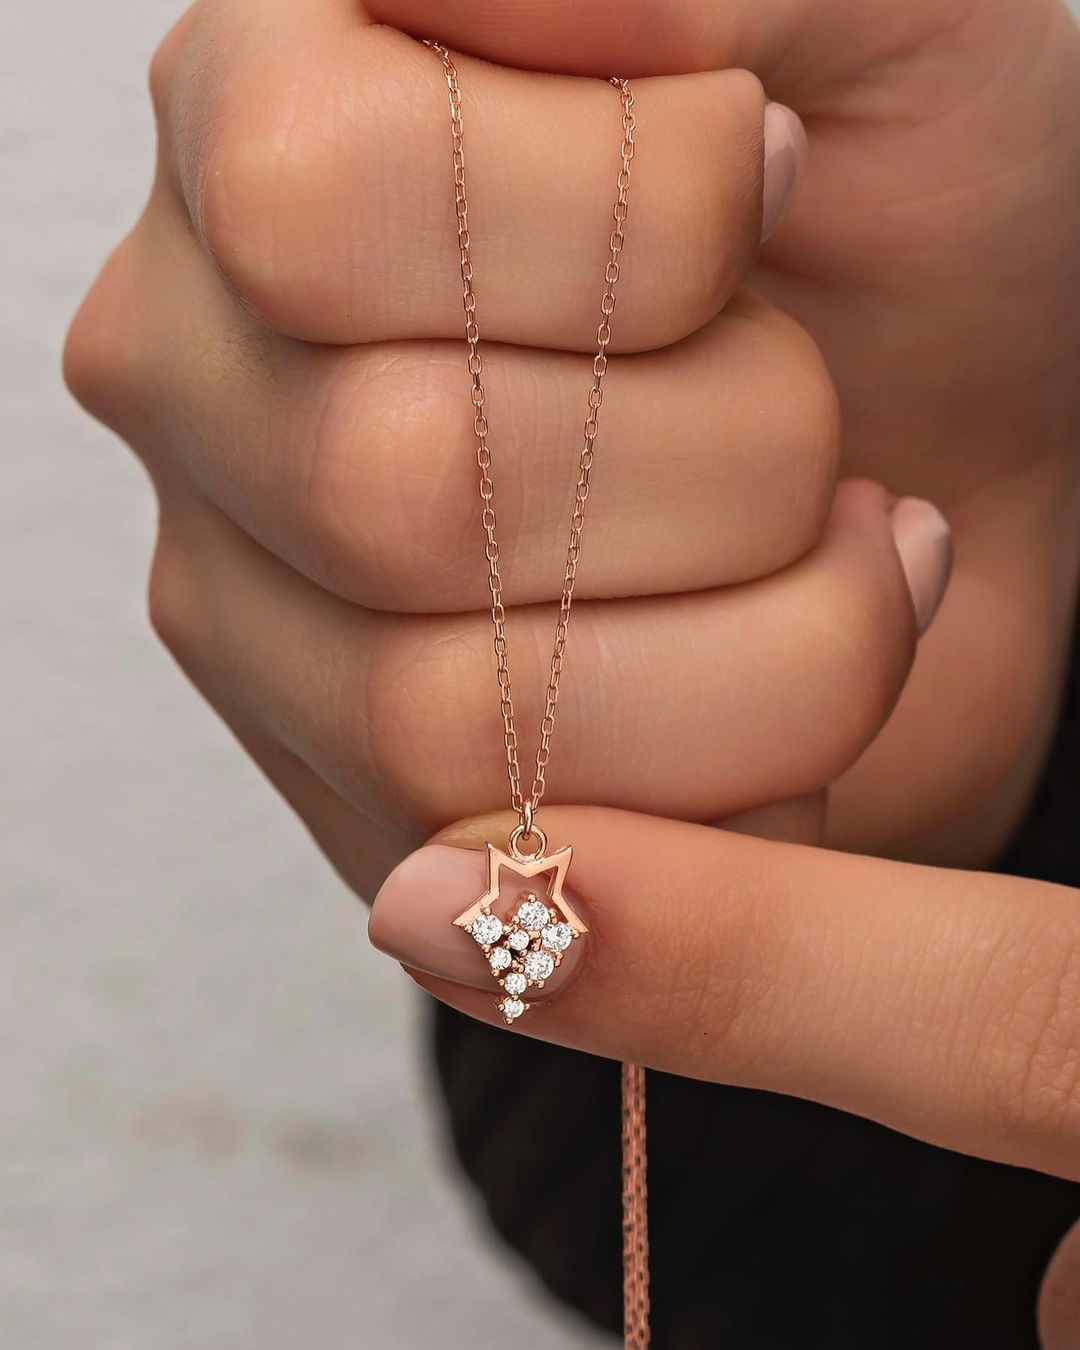 rose gold necklace